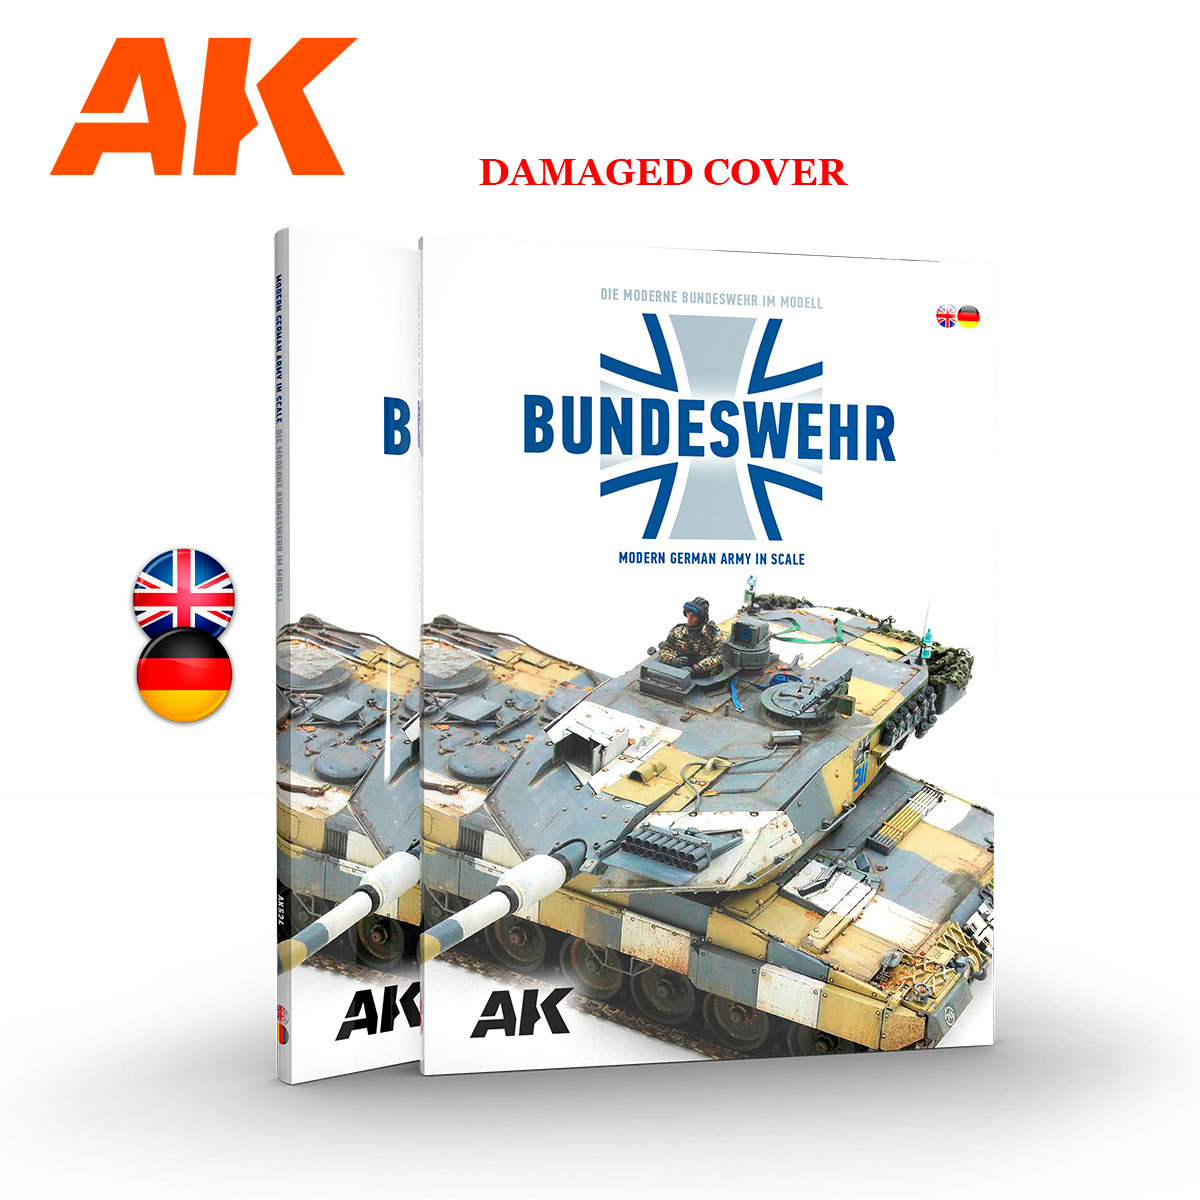 BUNDESWEHR – Modern German Army in Scale (Damaged cover)